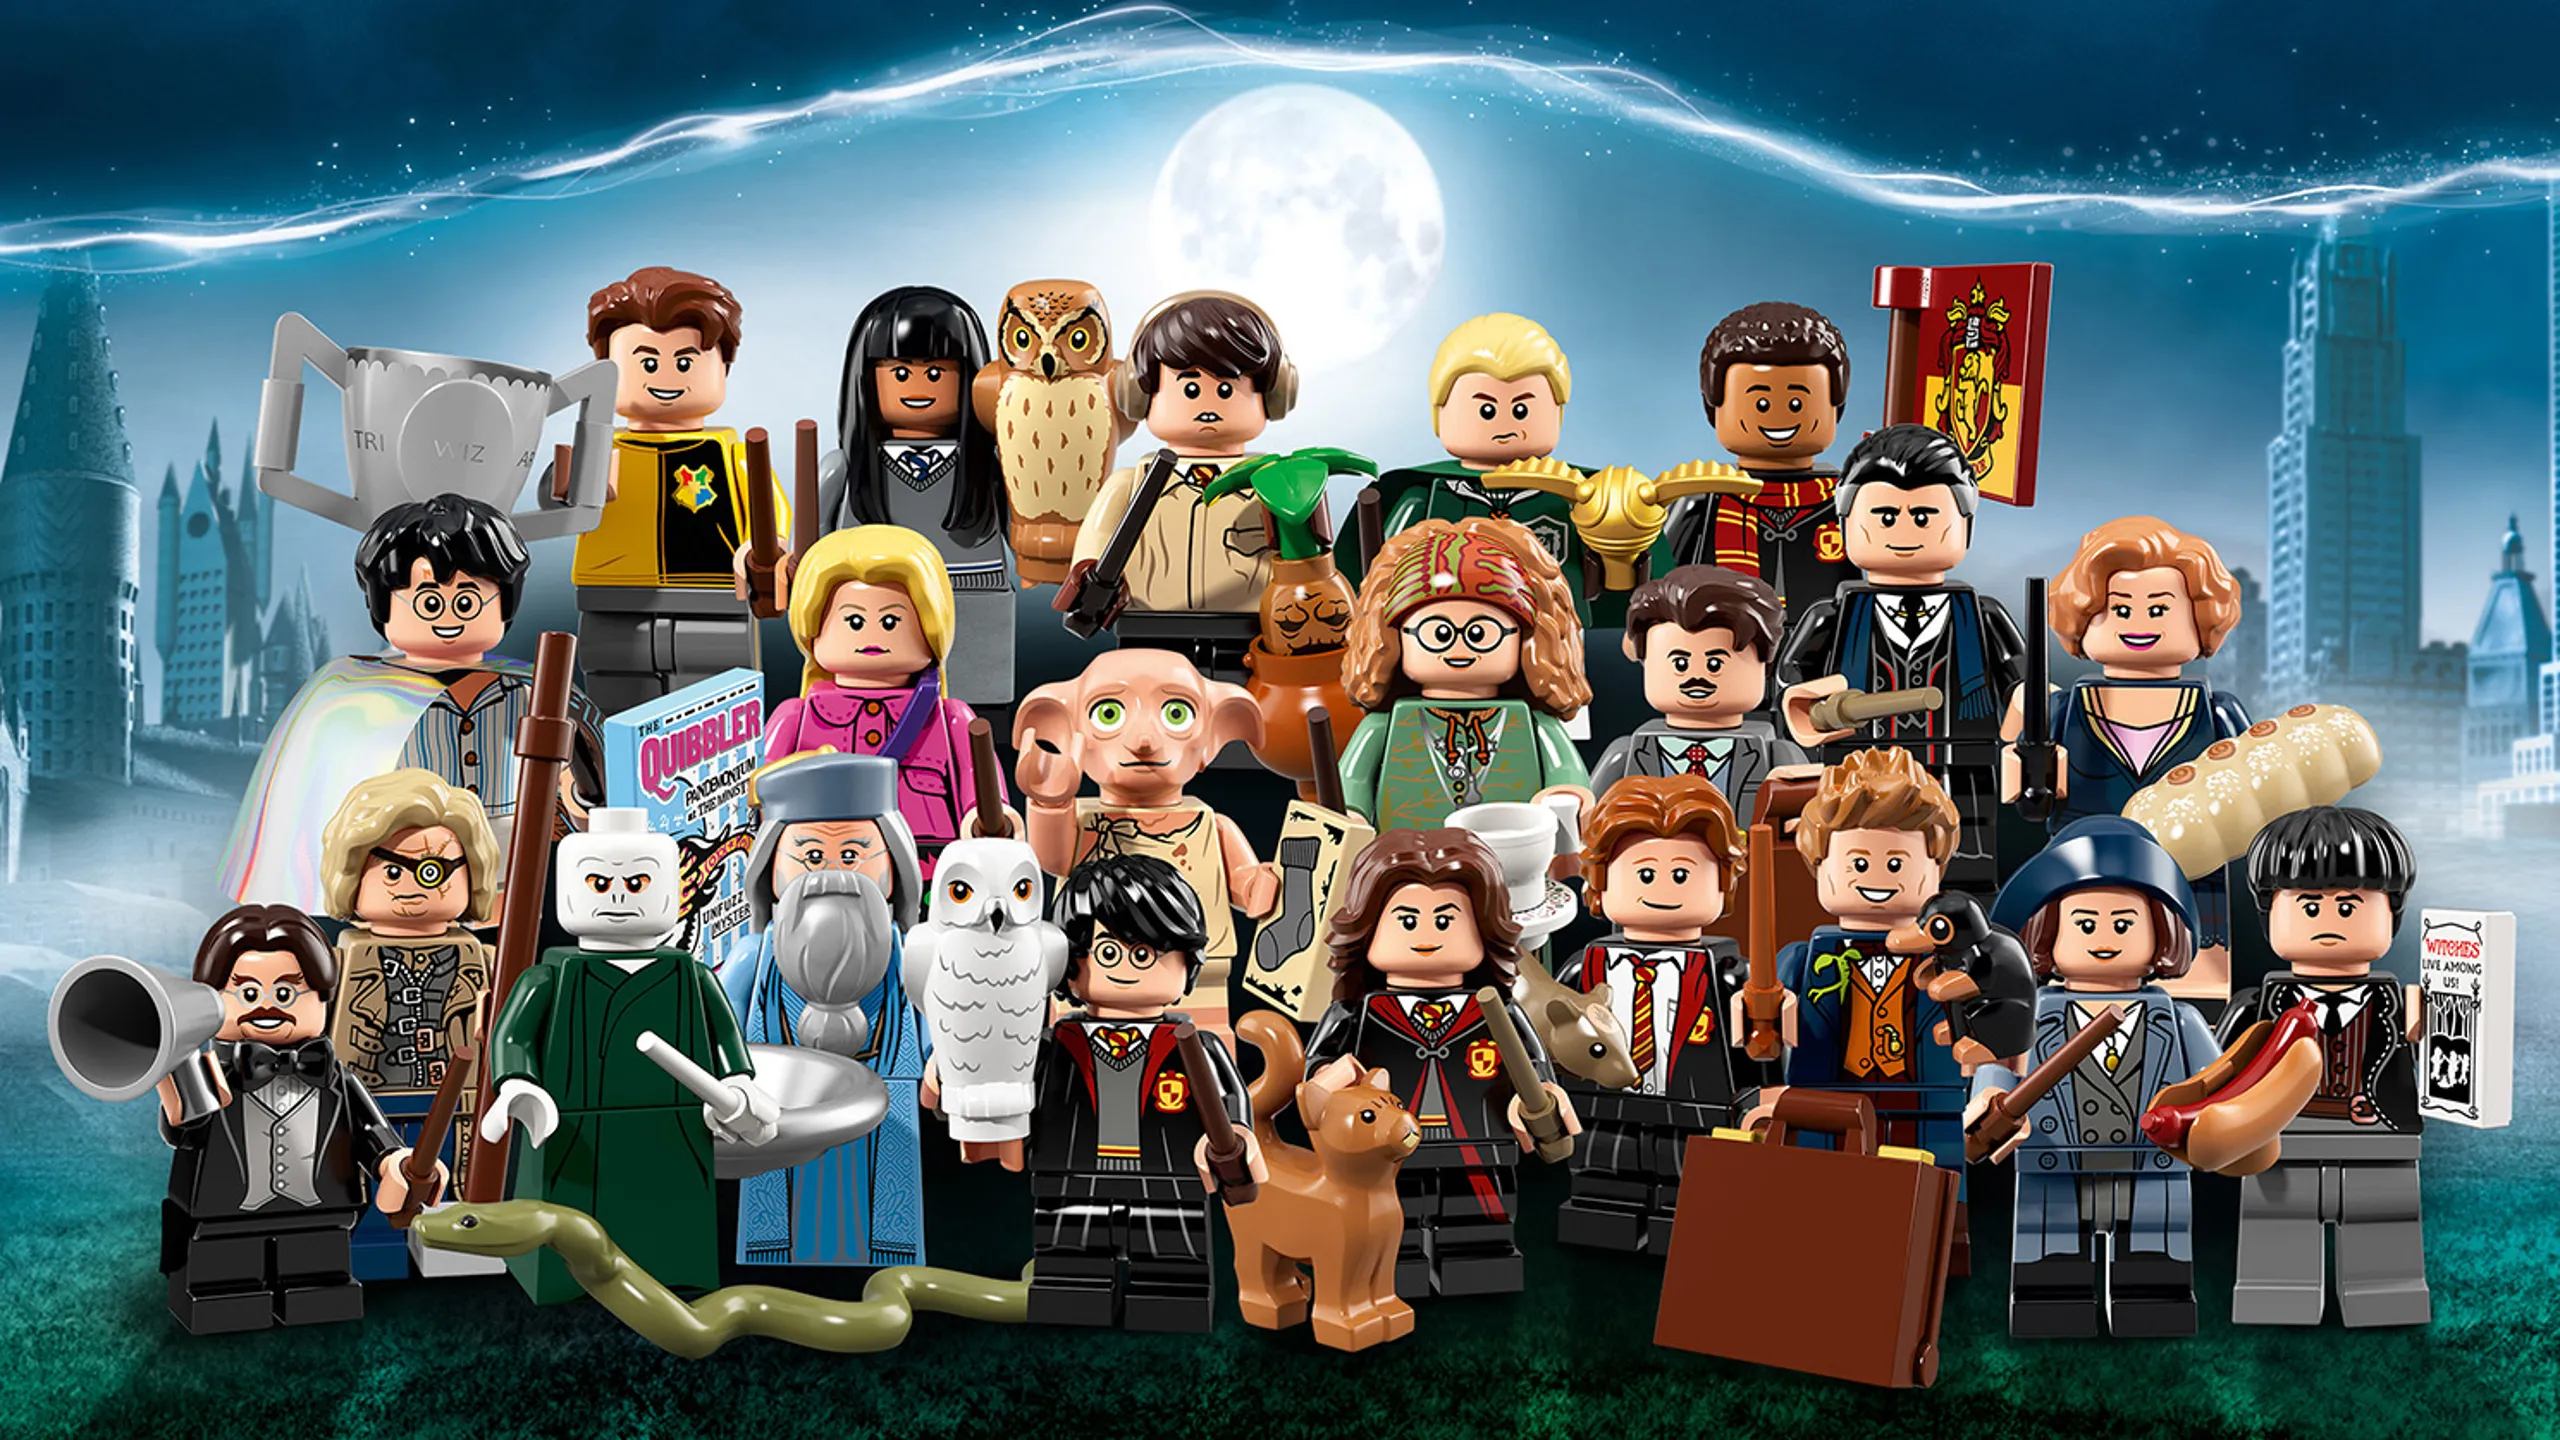 LEGO Minifigures - 71022 Harry Potter and Fantastic Beasts - Collect characters from the Harry Potter and Fantastic Beasts stories like Newt Scamander, Tina Goldstein, Albus Dumbledore and Harry Potter himself!